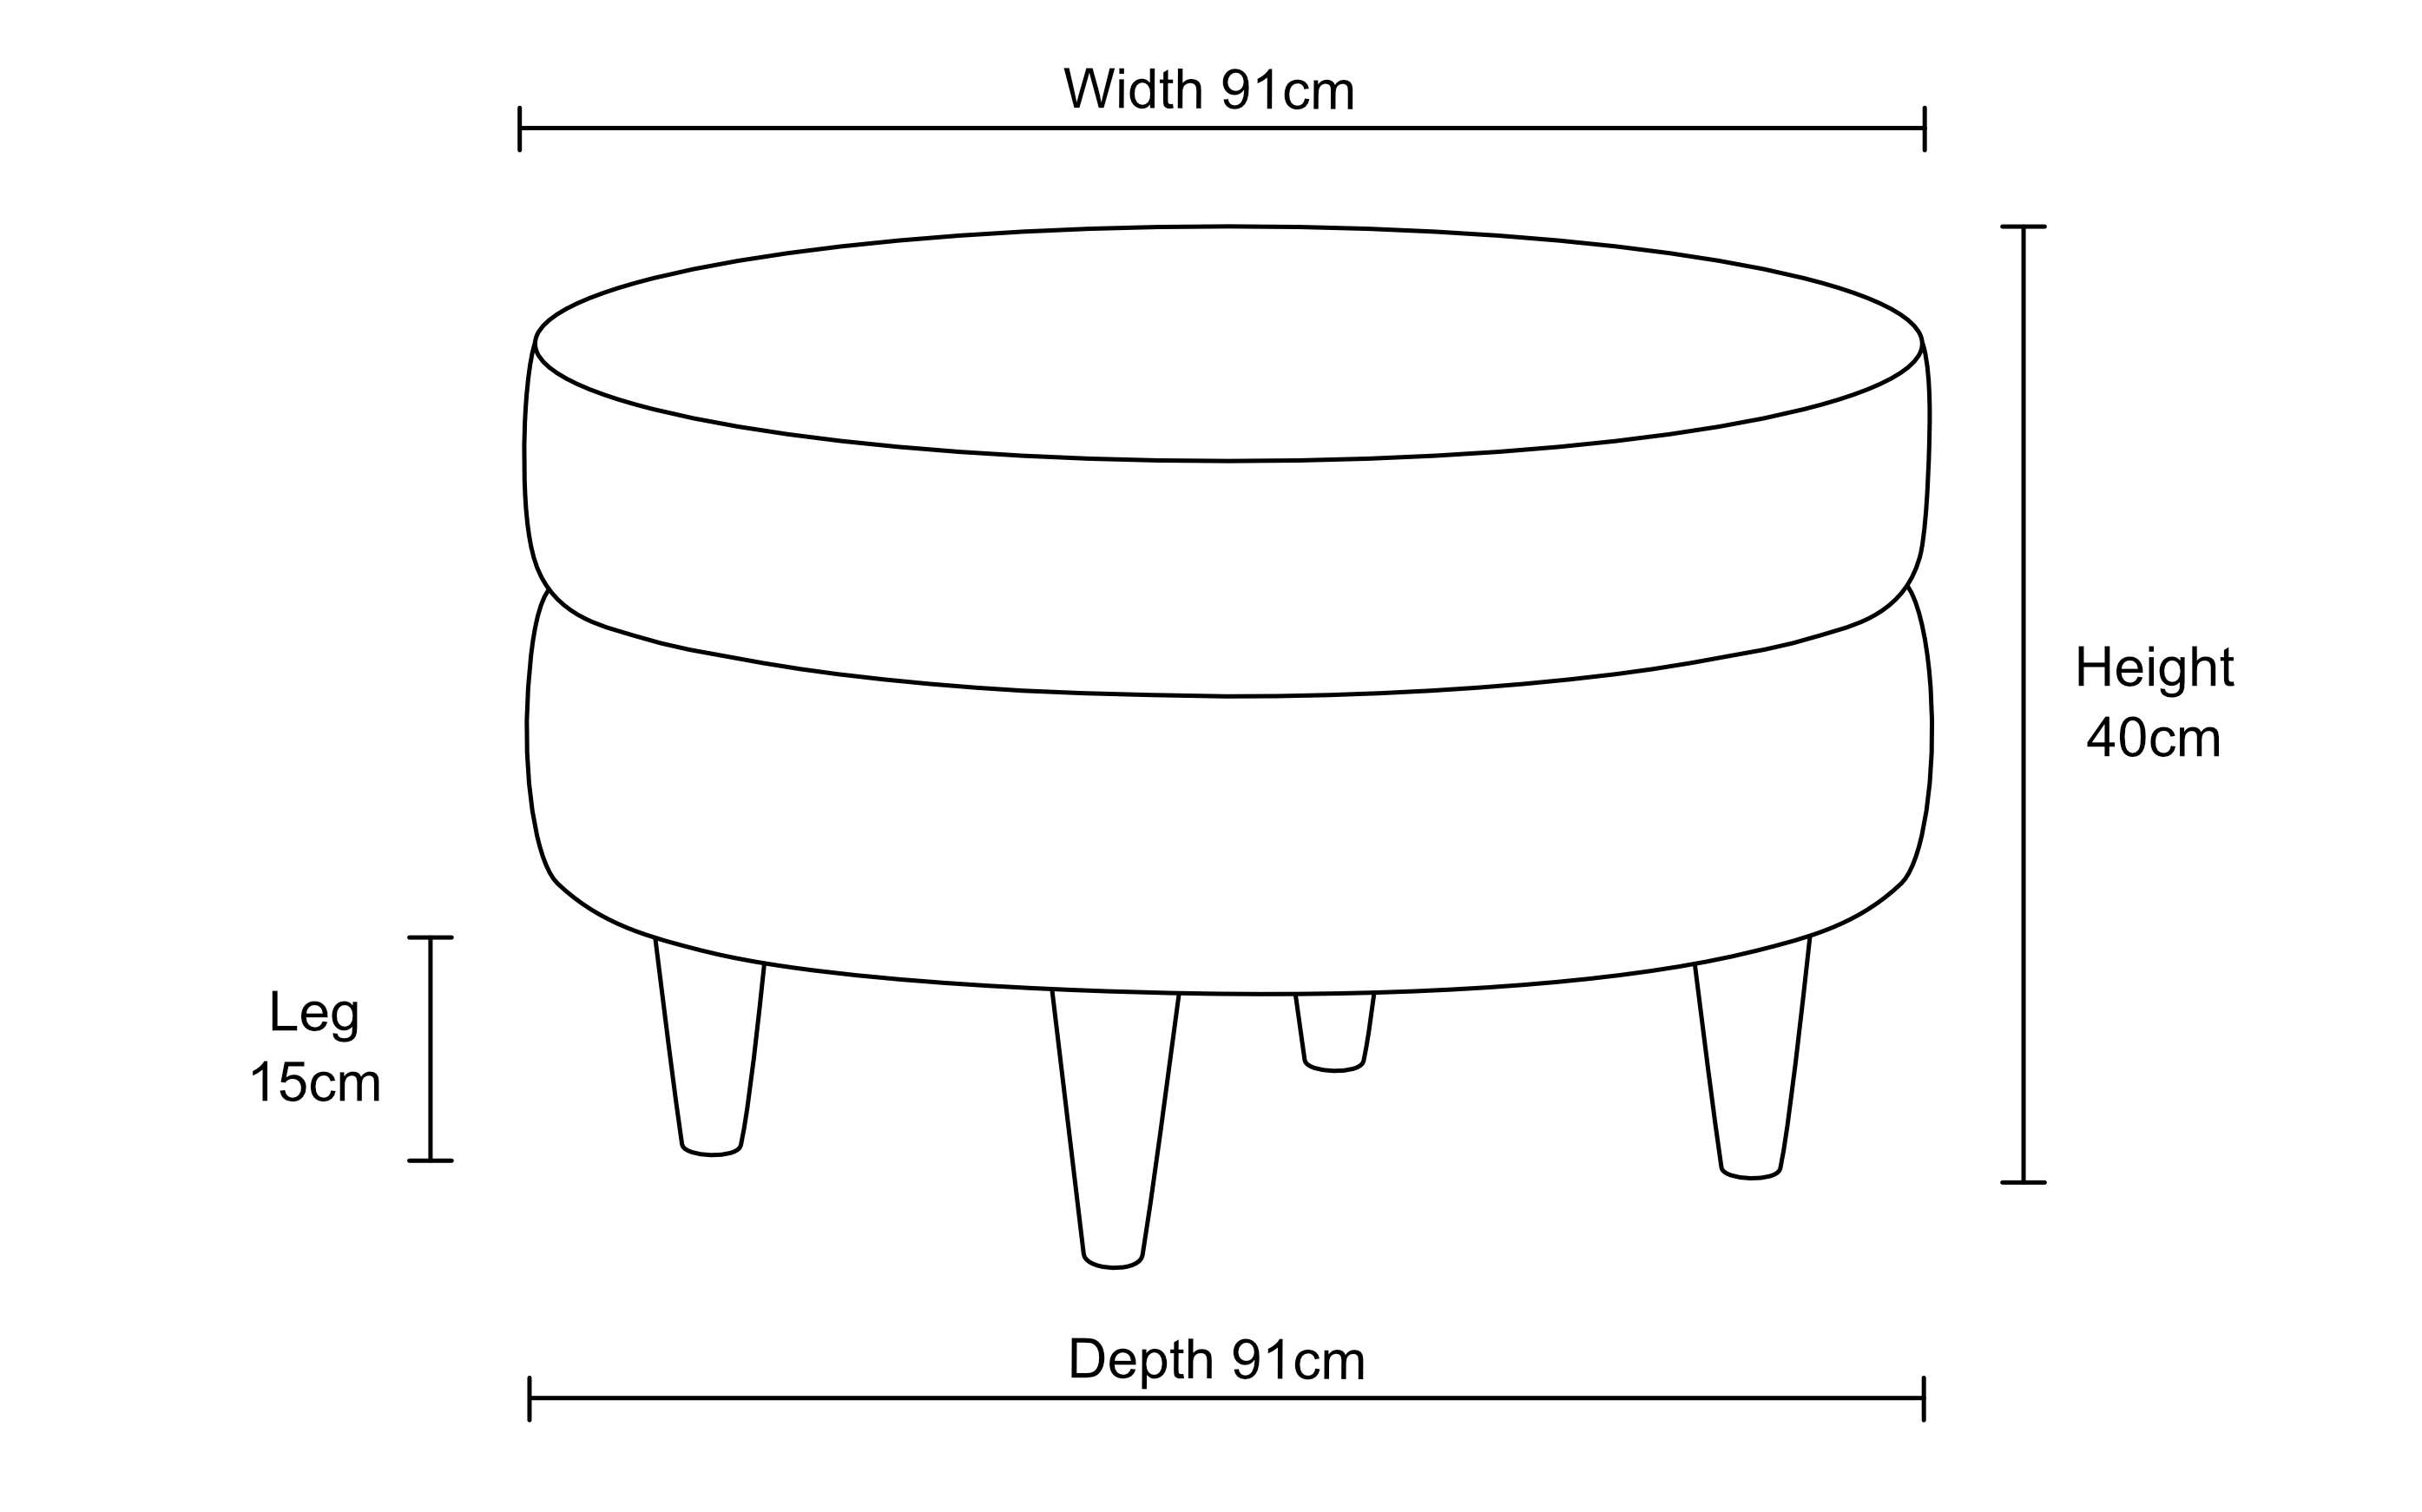 https://www.footstools.co.uk/wp-content/uploads/round-footstool-36x36-dimensions-4.jpg